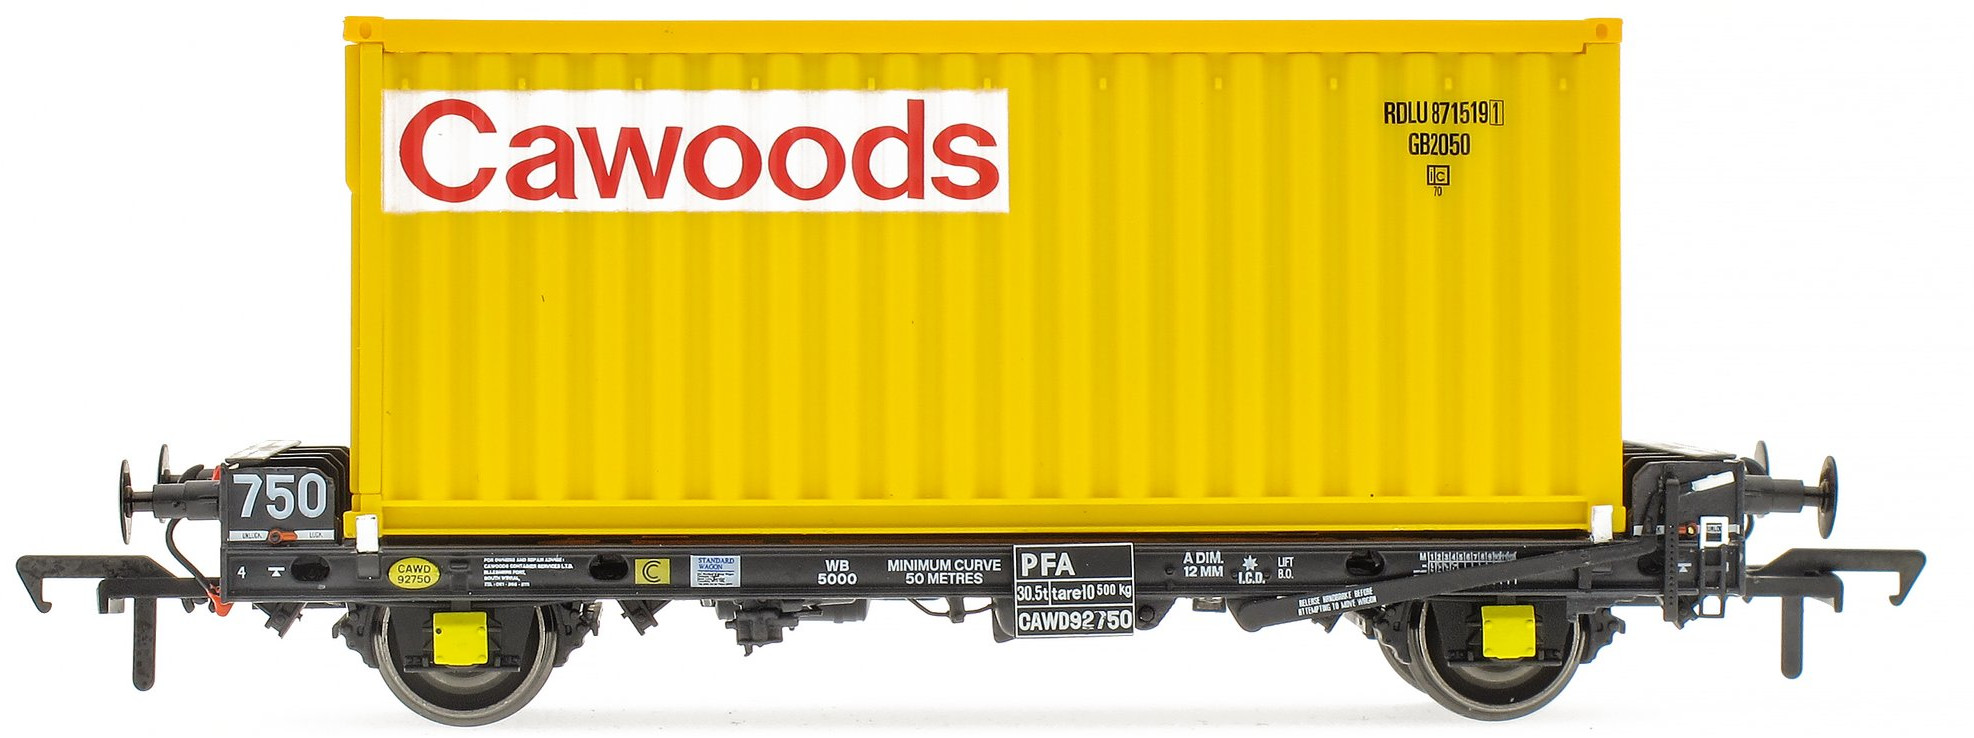 Accurascale ACC2061CWDB Flat Cawoods CAWD92750 Image